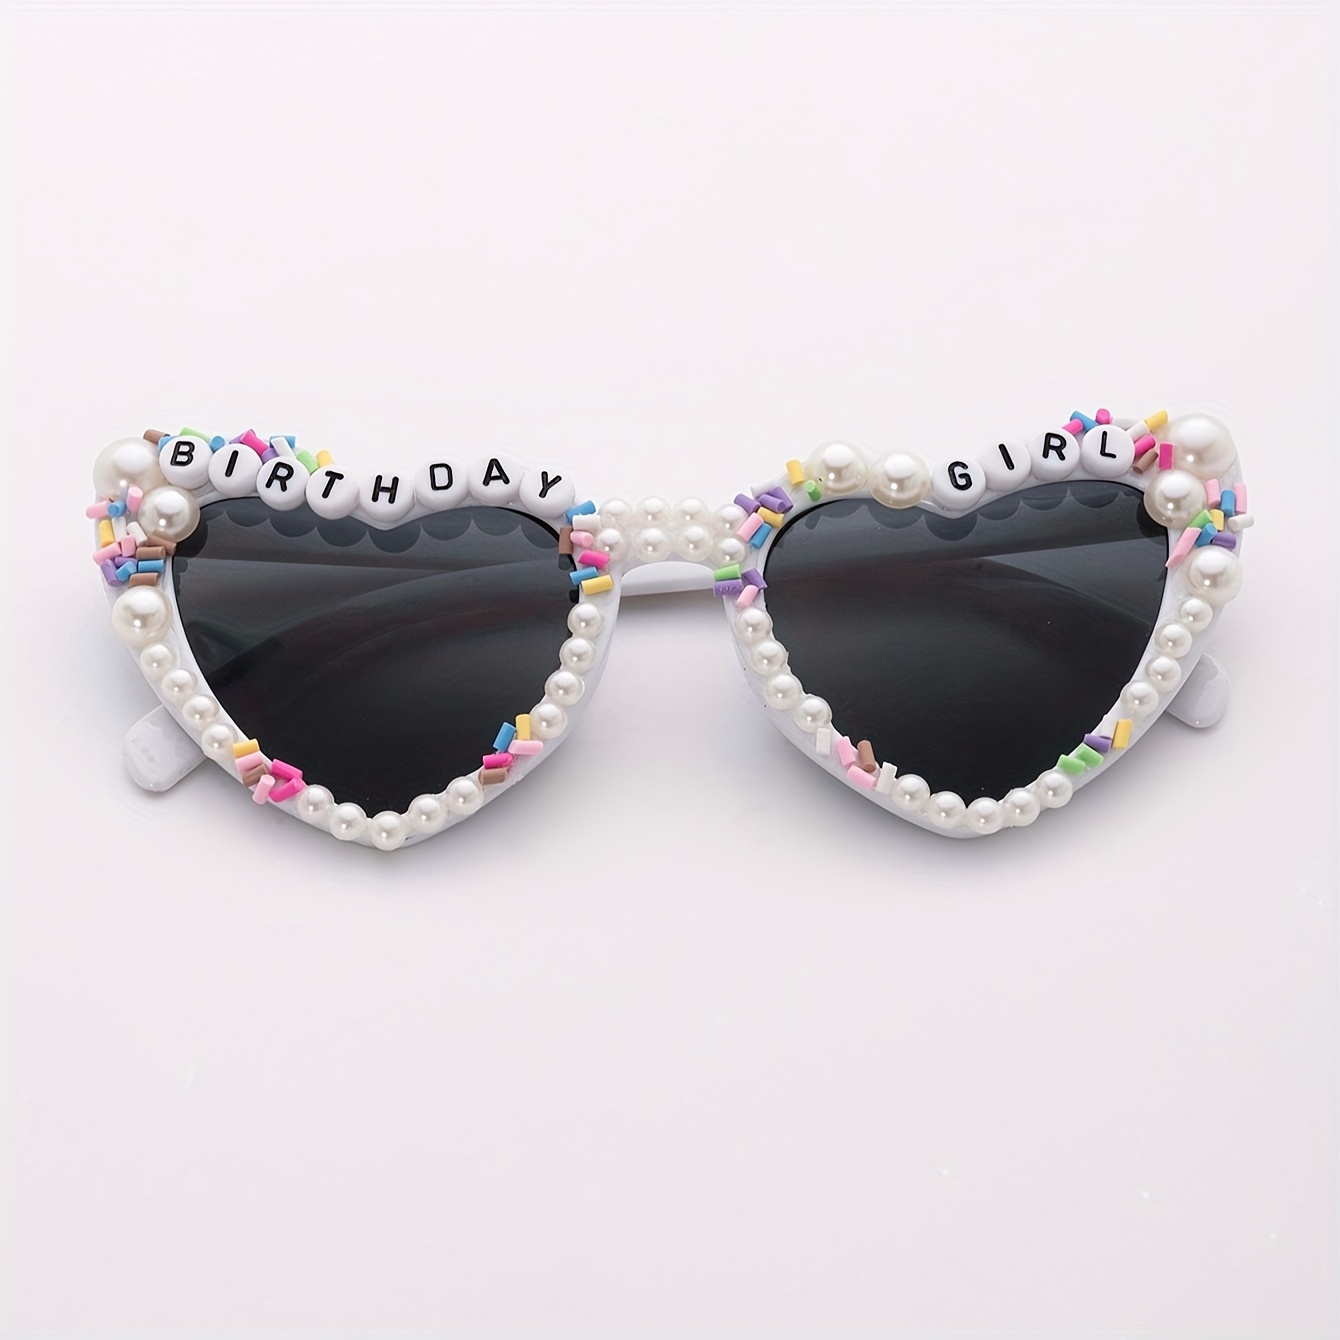 

Heart-shaped Party Glasses For Daily Use With Pearl Inlaid With Pearls And Colorful Letters In Peach Heart Shape For Music Festival